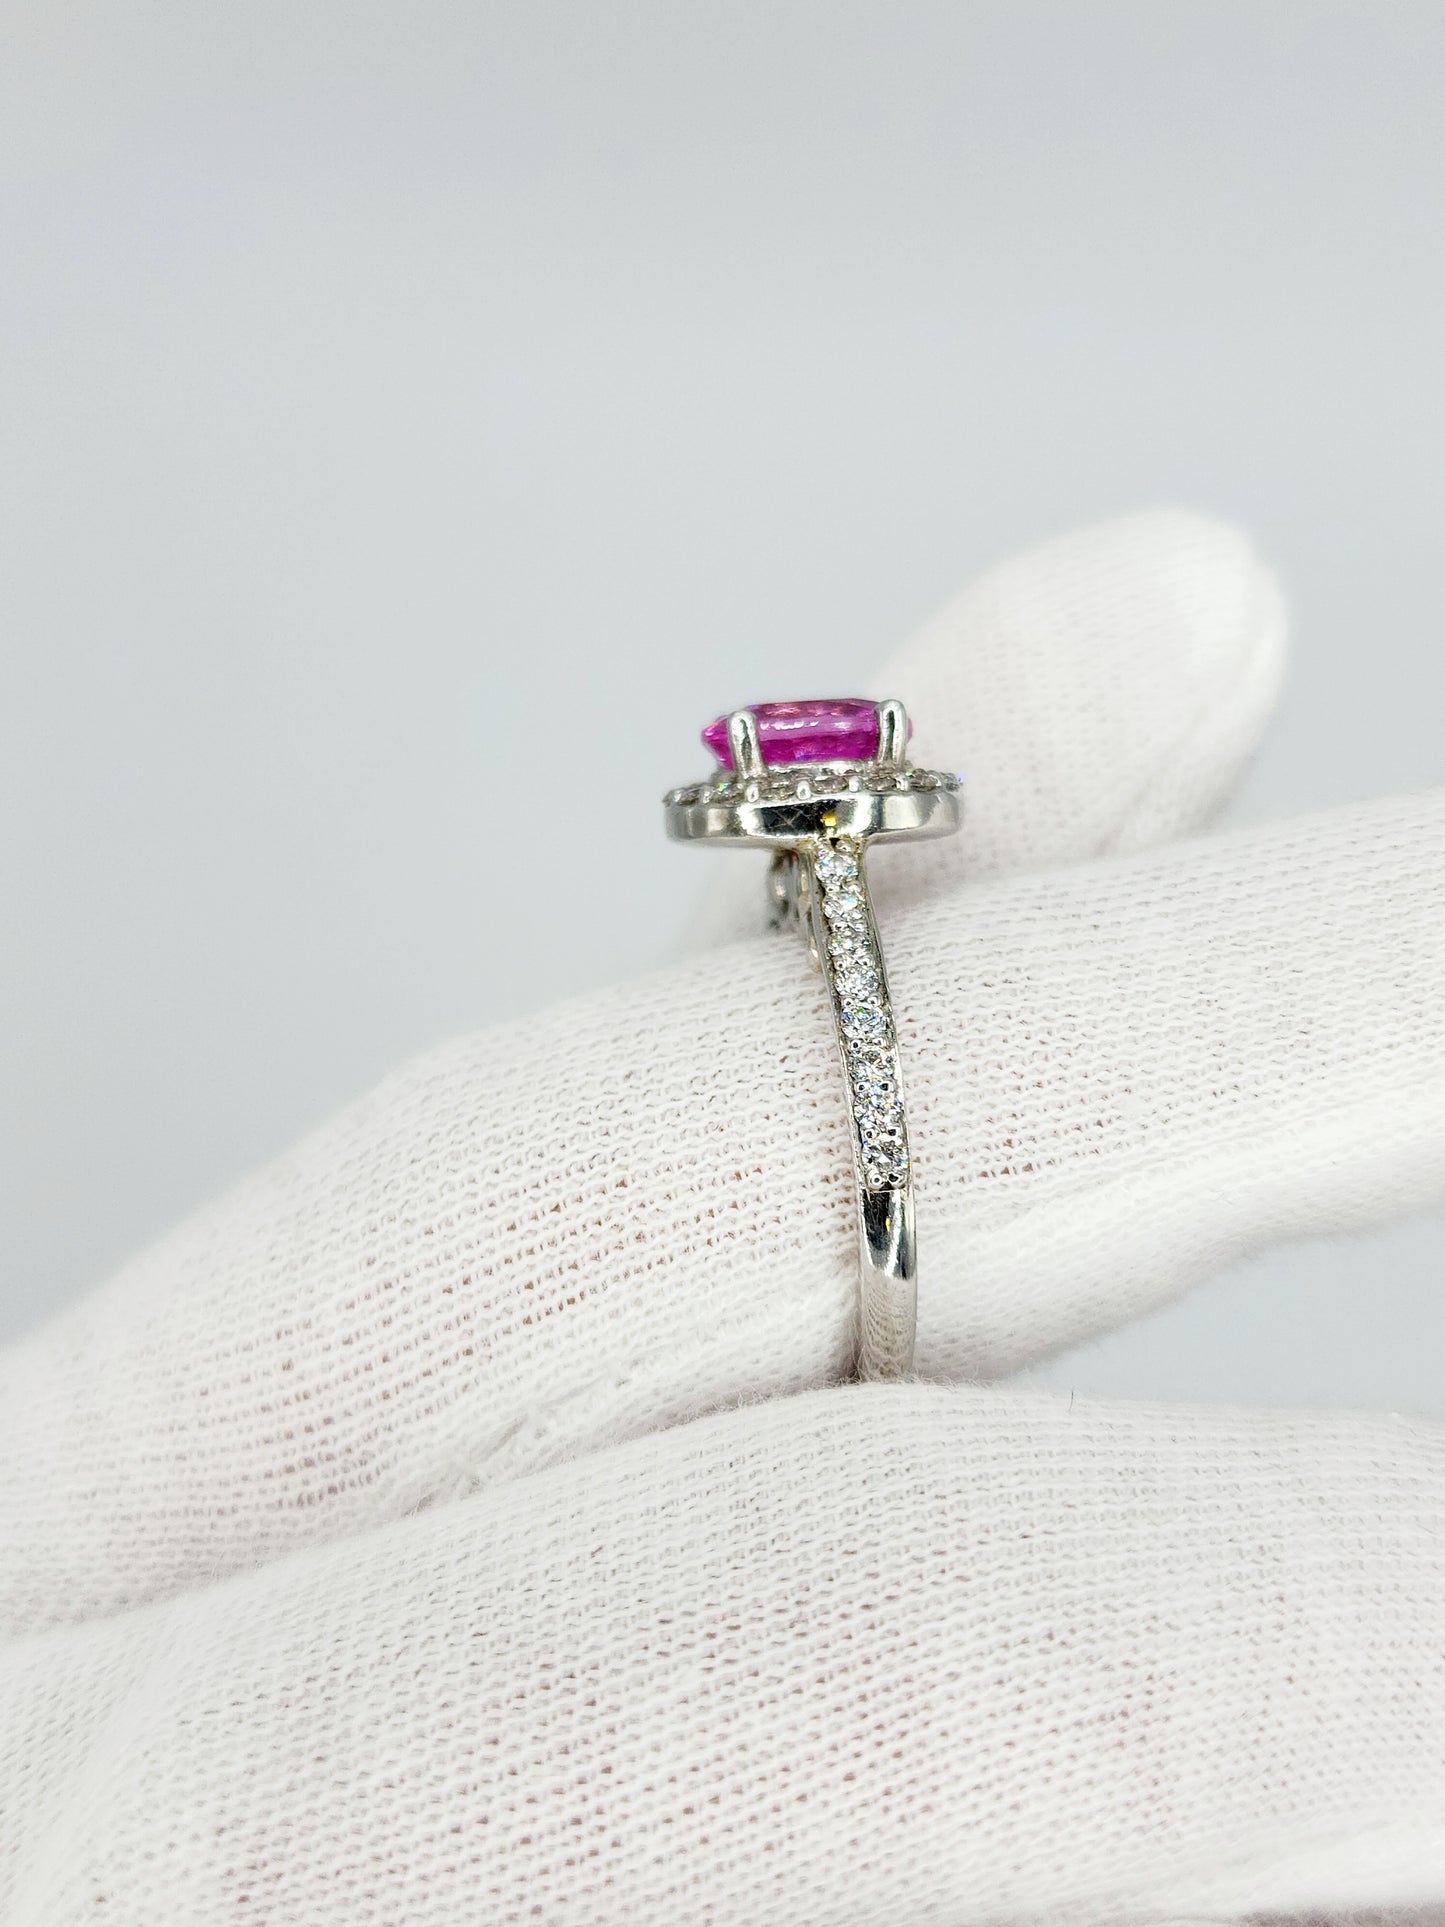 Ladies Halo Design Ring in White Gold with Pink Sapphire and Diamonds